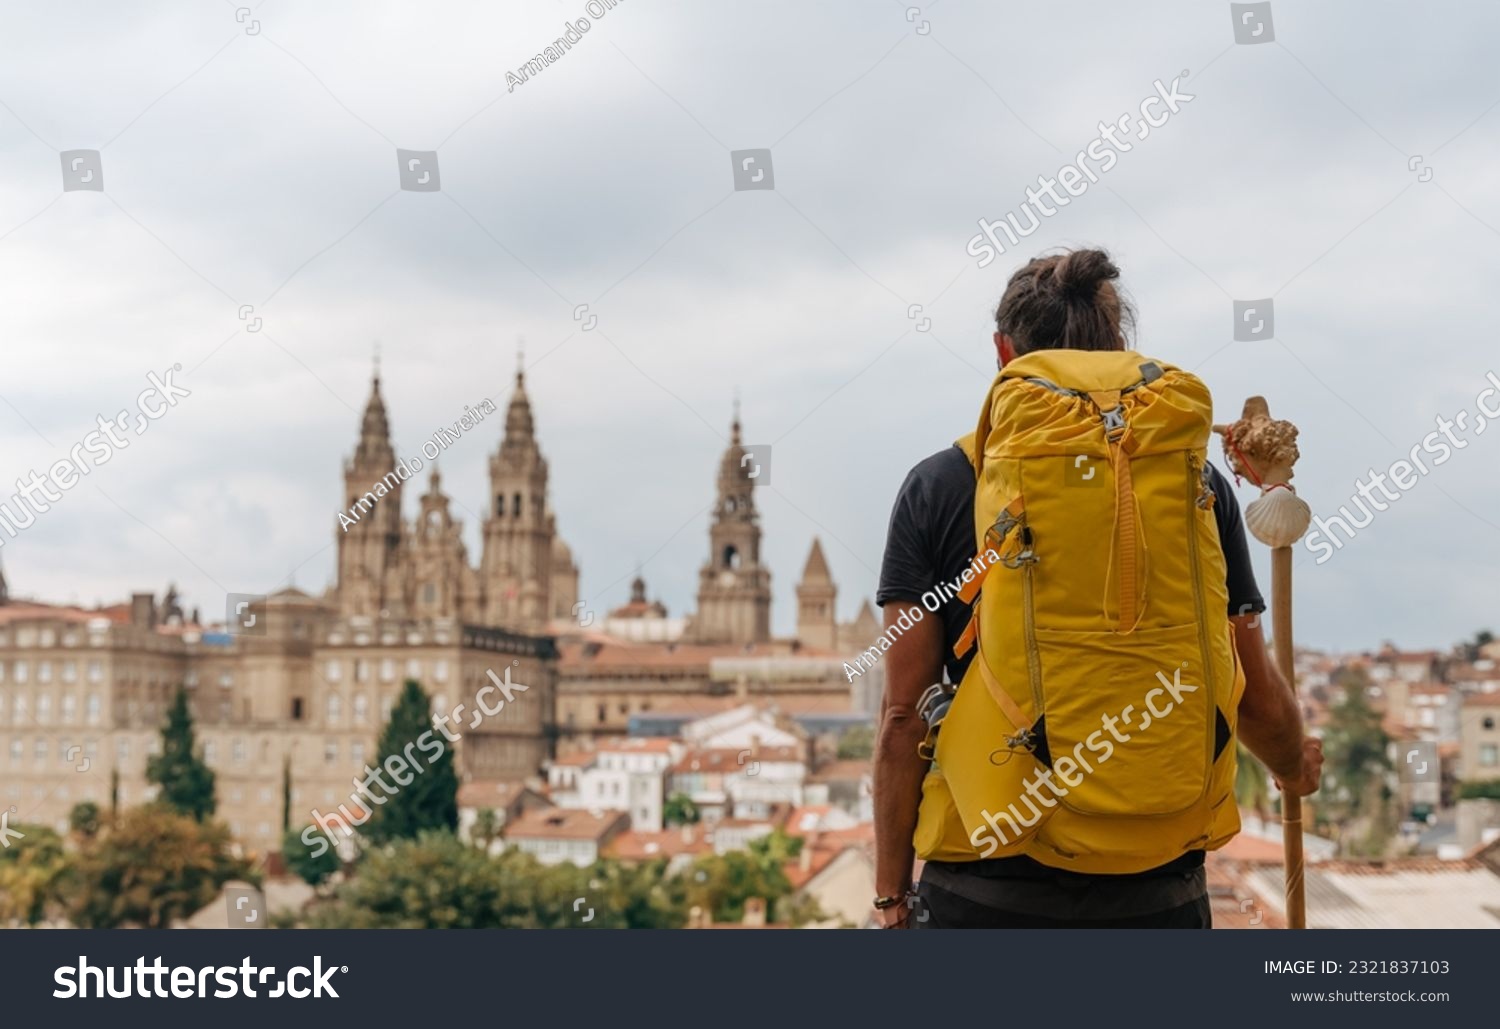 Camino de Santiago - Young hipster pilgrim ends the Way of St James pilgrimage enjoying cathedral and the Santiago de Compostela old town cityscape in Galicia, Spain #2321837103